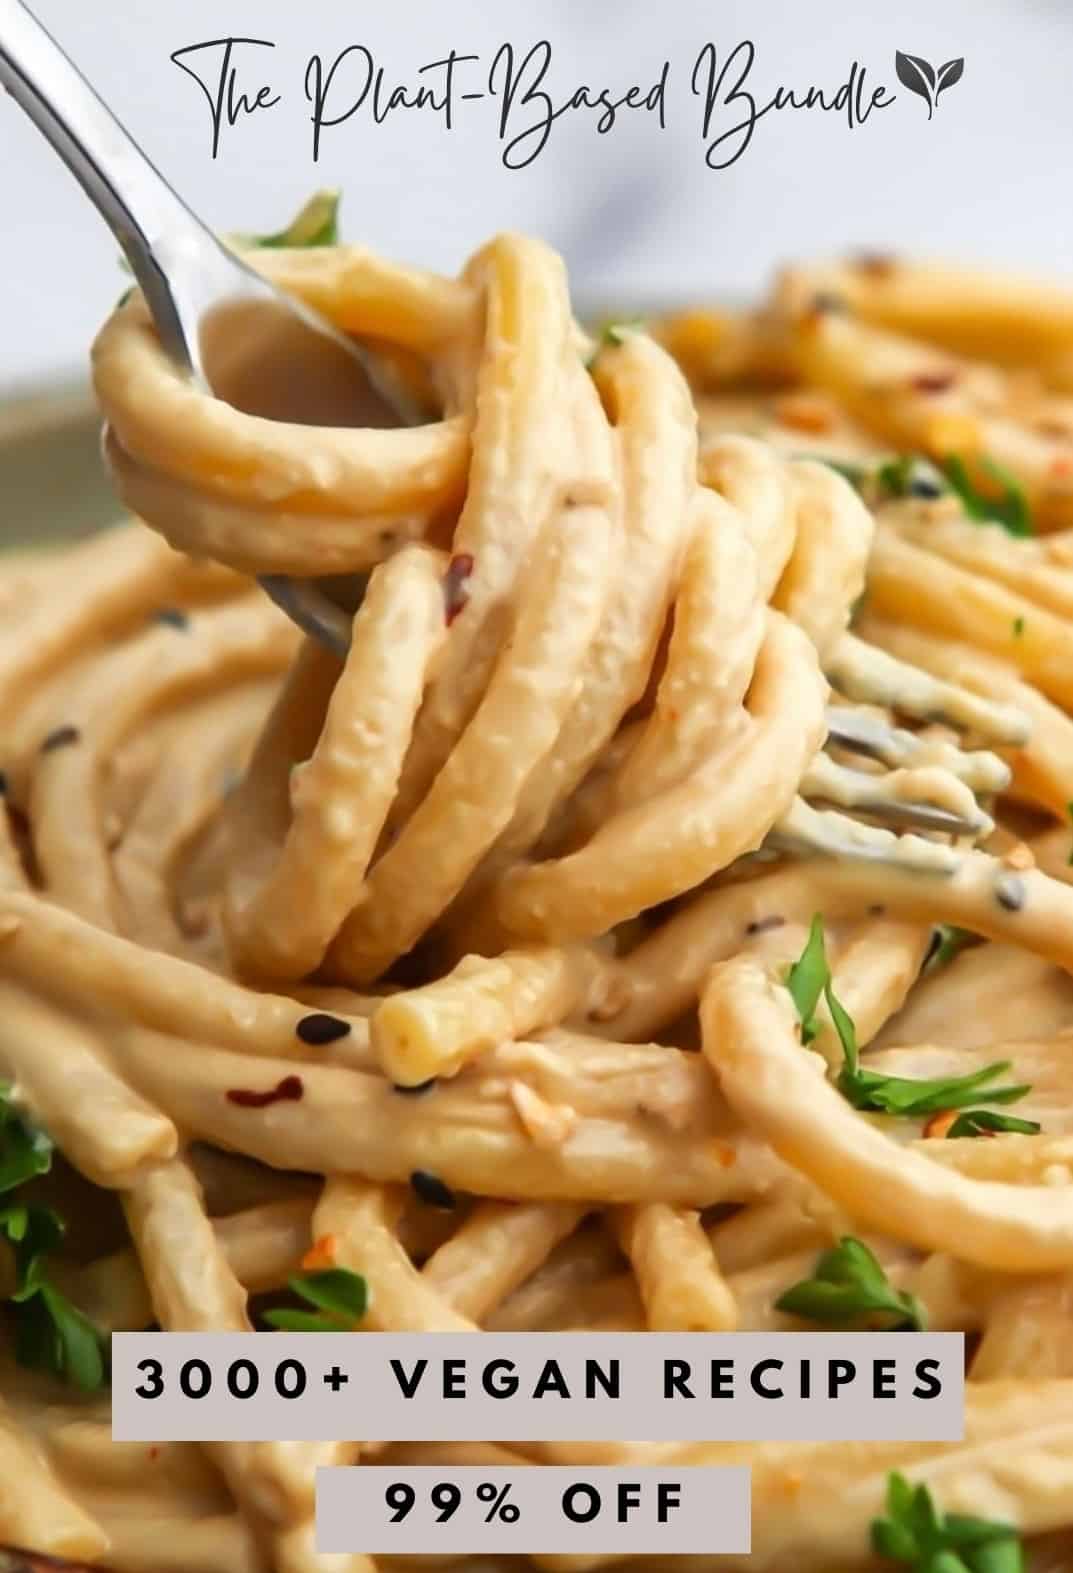 Close up of pasta with creamy sauce with text reading "the plant based bundle" and "3000+ vegan recipes 99% off".